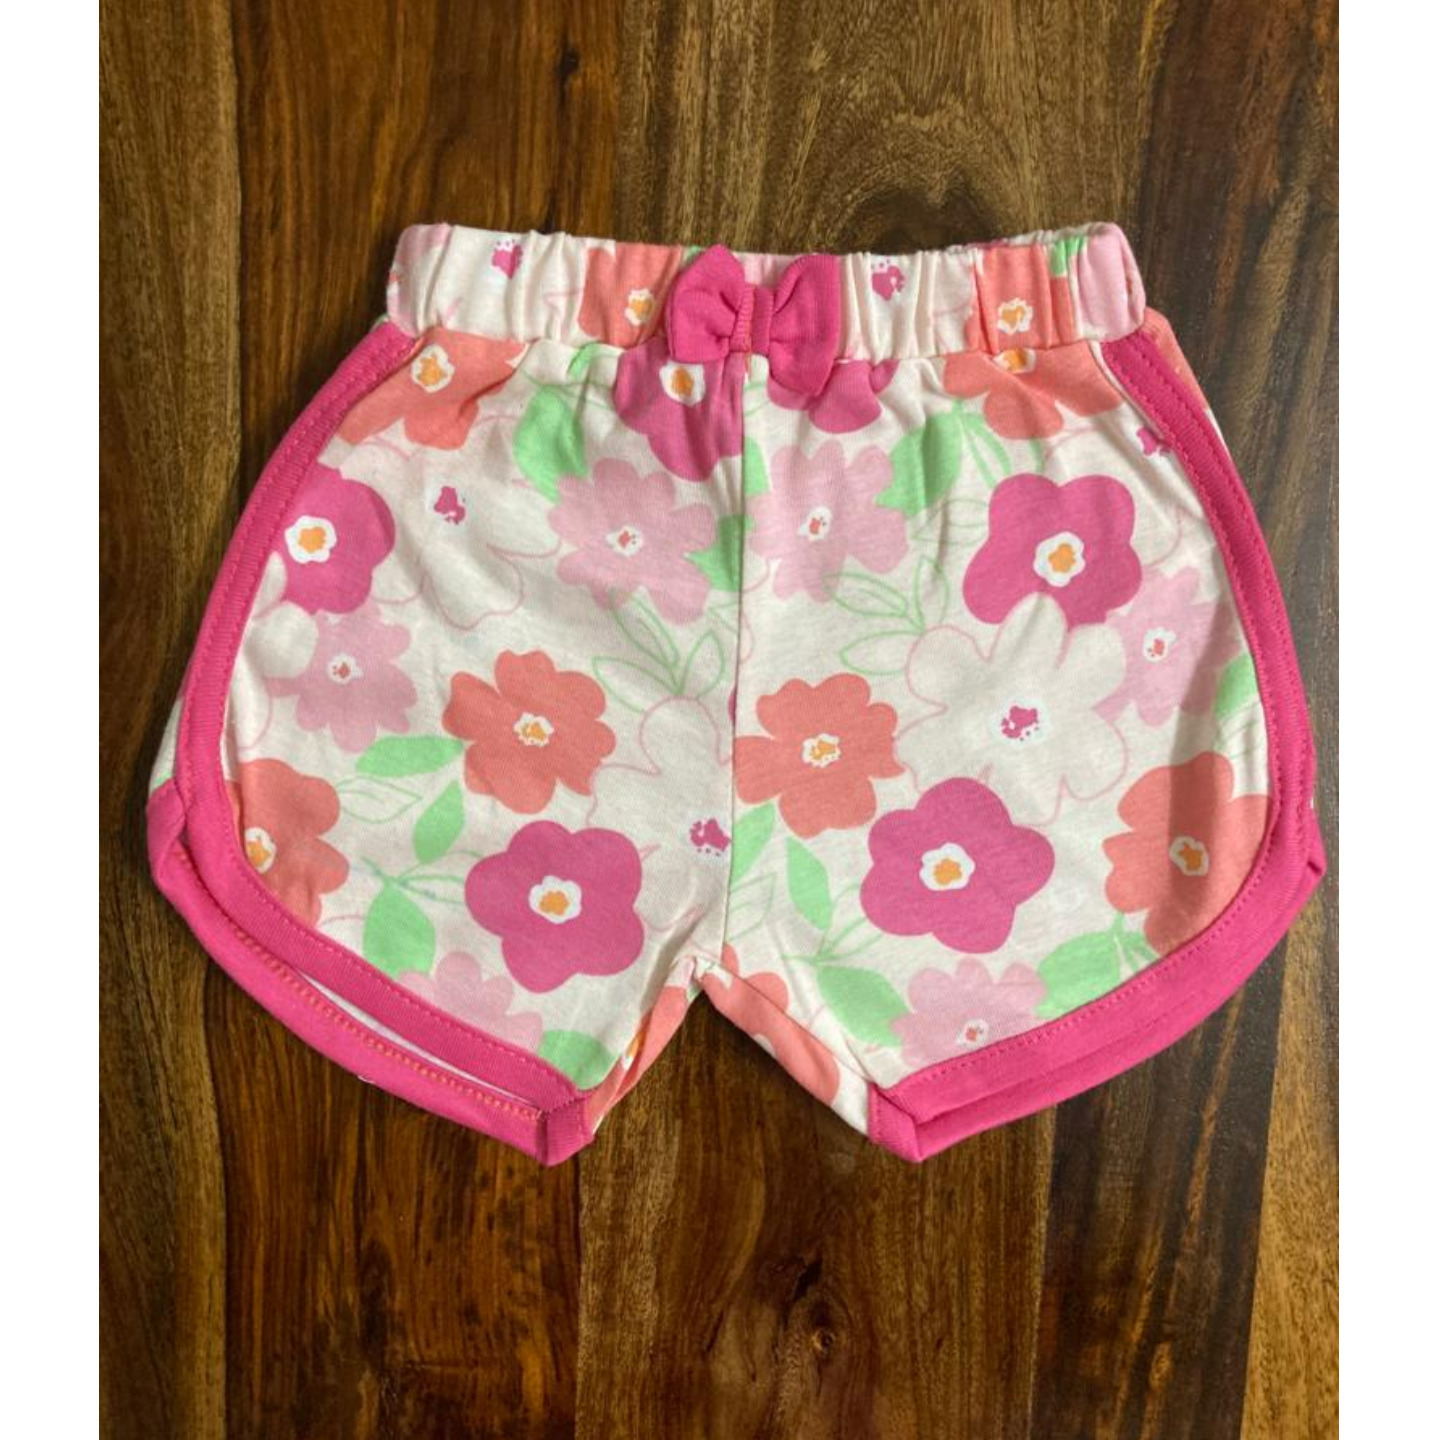 Precious One Bow Shorts Made in India 12 Months to 3 Years Size